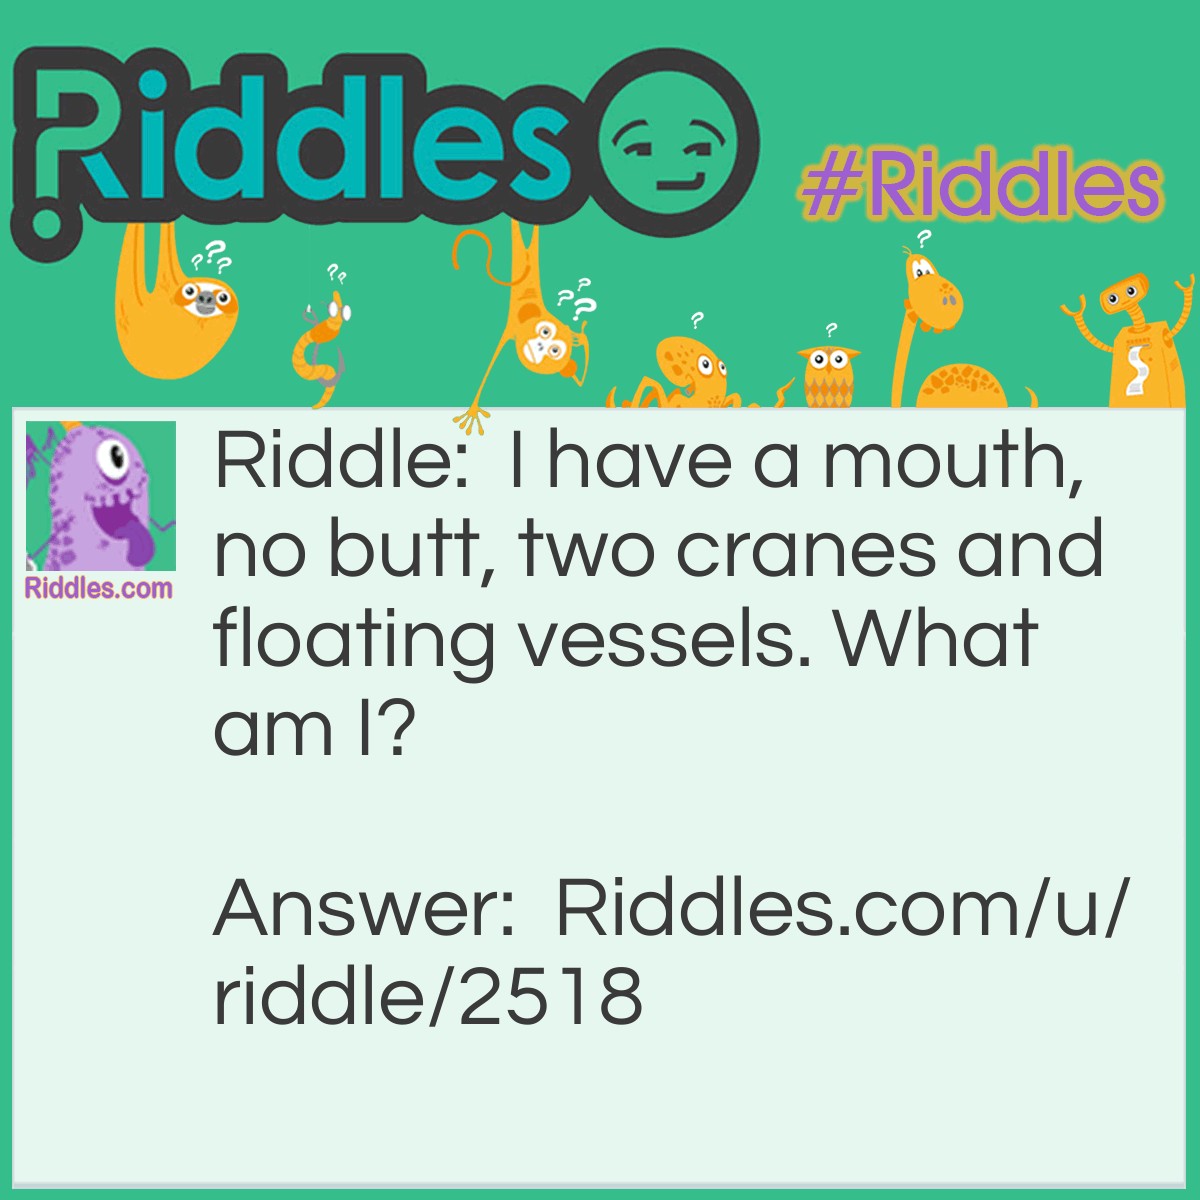 Riddle: I have a mouth, no butt, two cranes and floating vessels. What am I? Answer: A ship dock!